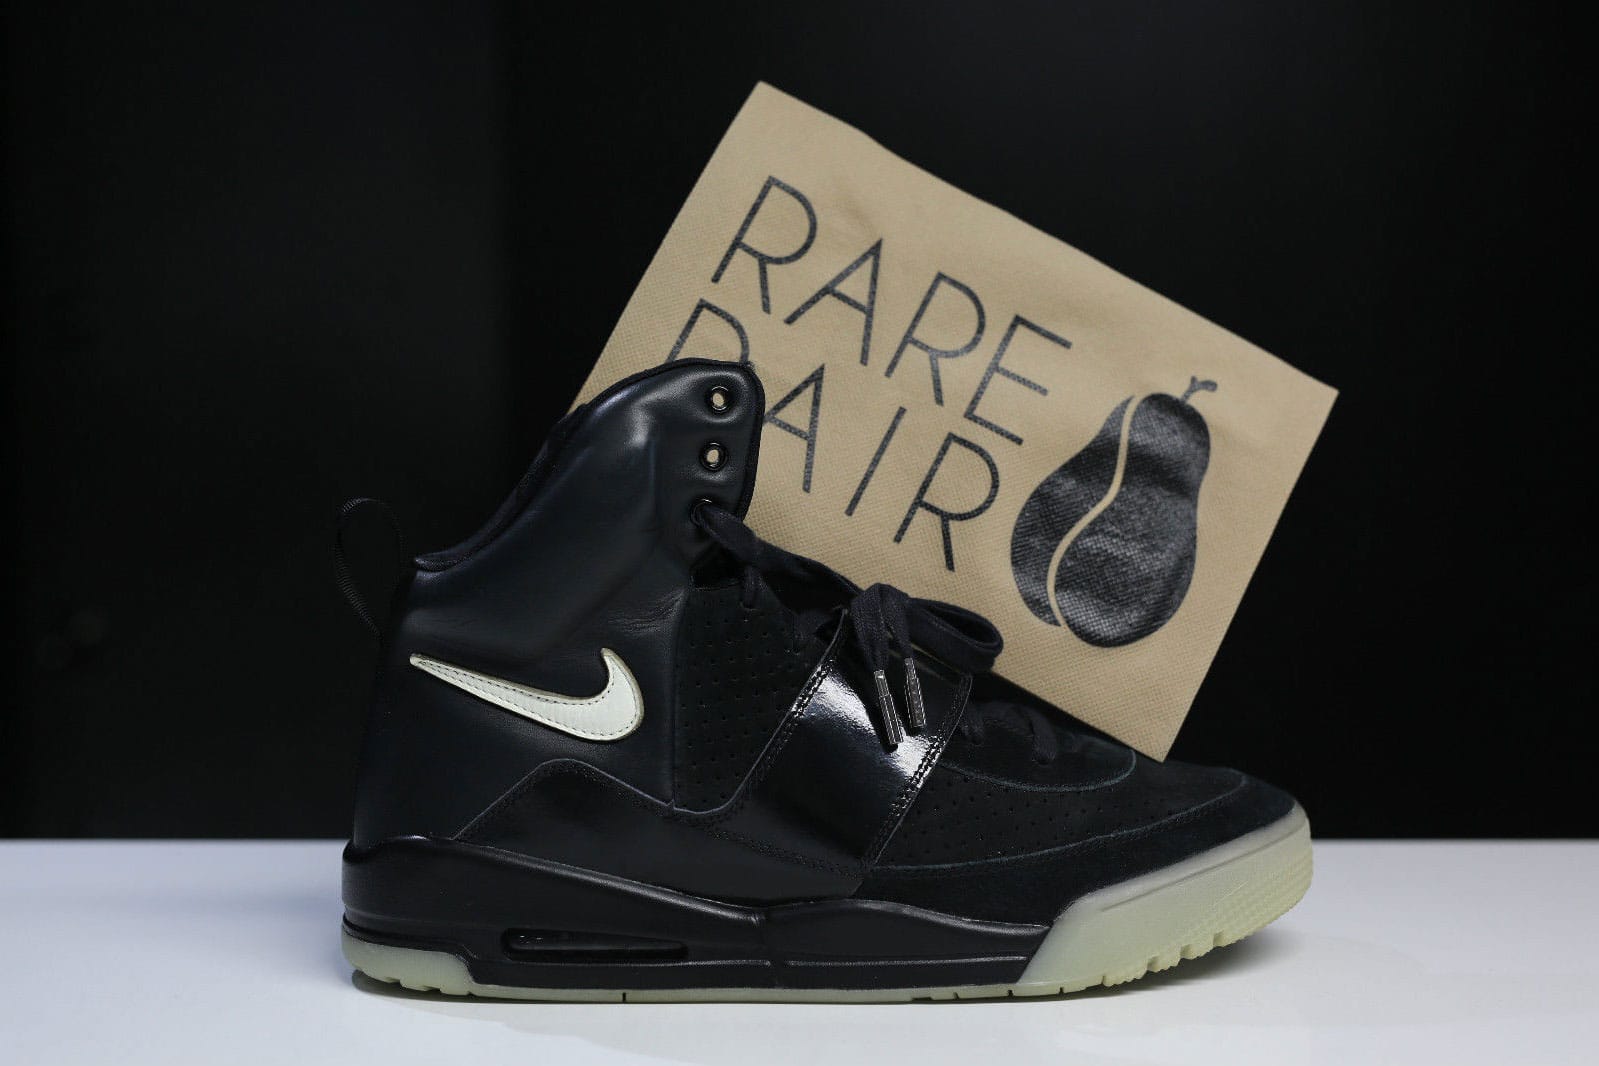 Nike Air Yeezy 1 Promo Sample For 